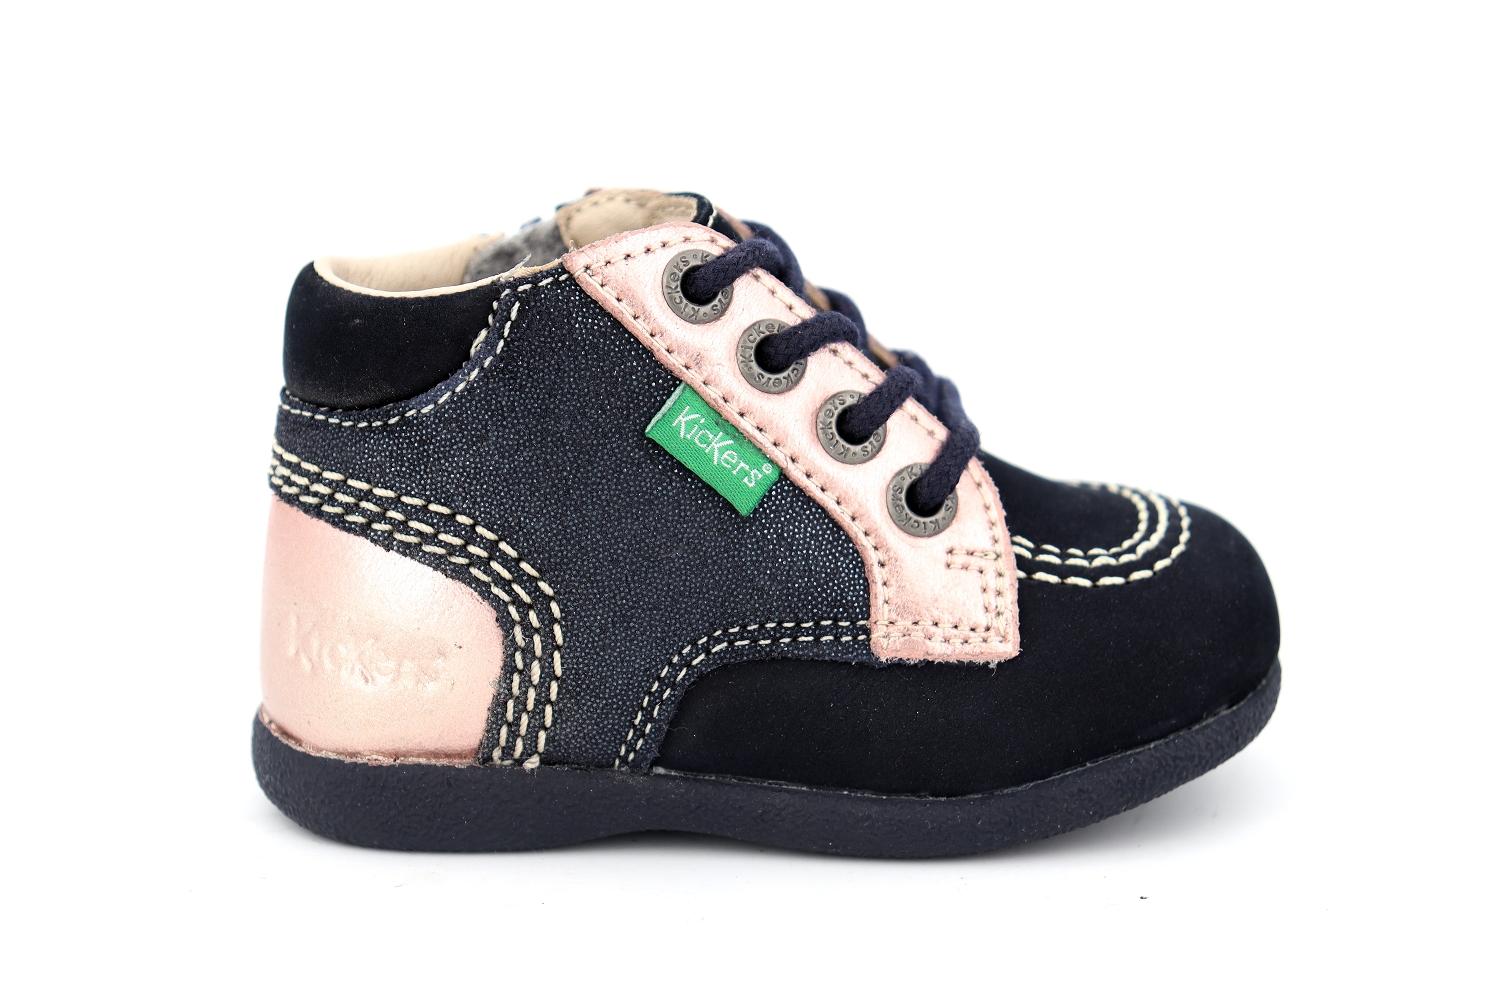 Chaussures kickers fille - Cdiscount